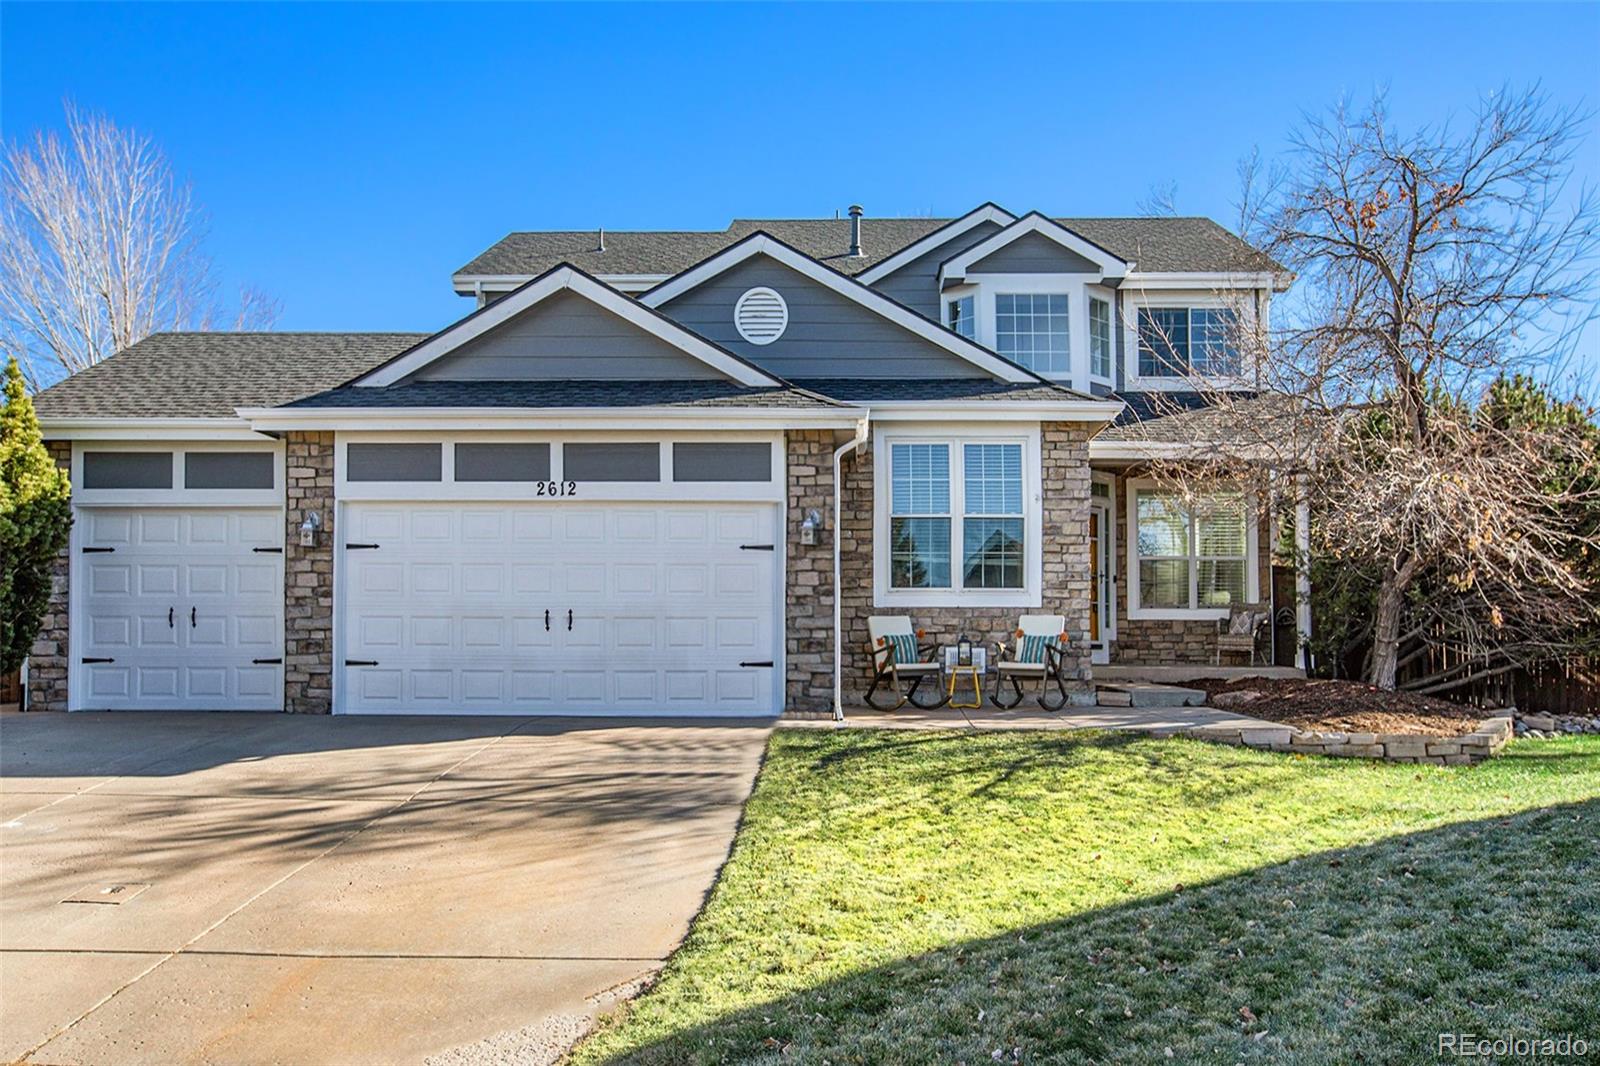 Report Image for 2612  Baneberry Court,Highlands Ranch, Colorado